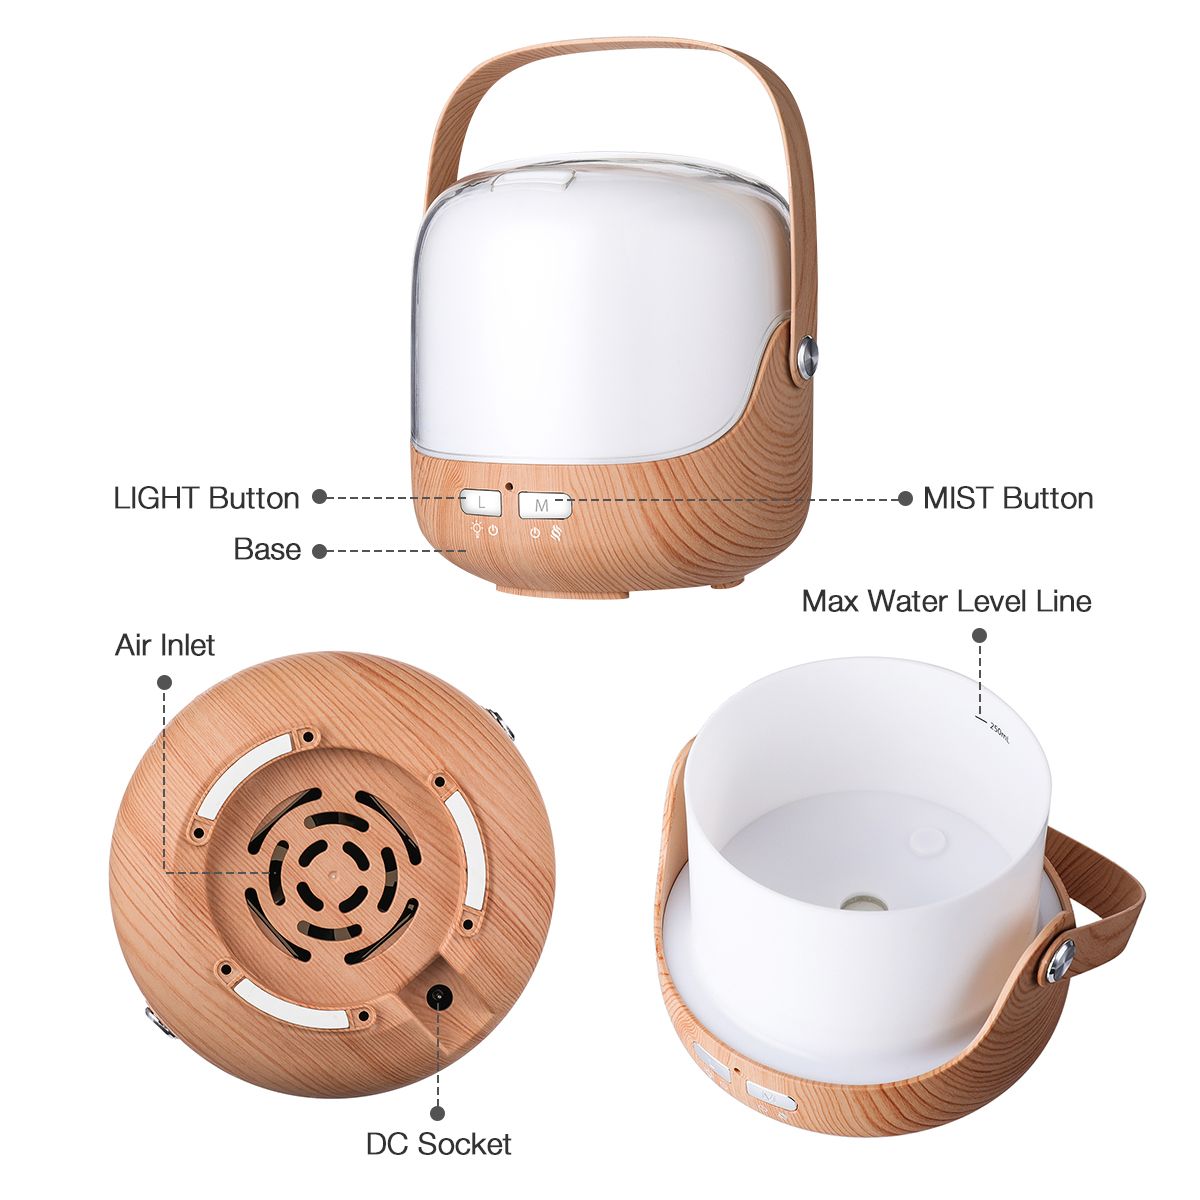 250ML-Electric-Ultrasonic-Air-Humidifier-Aromatherapy-Diffuser-with-7-LED-1537558